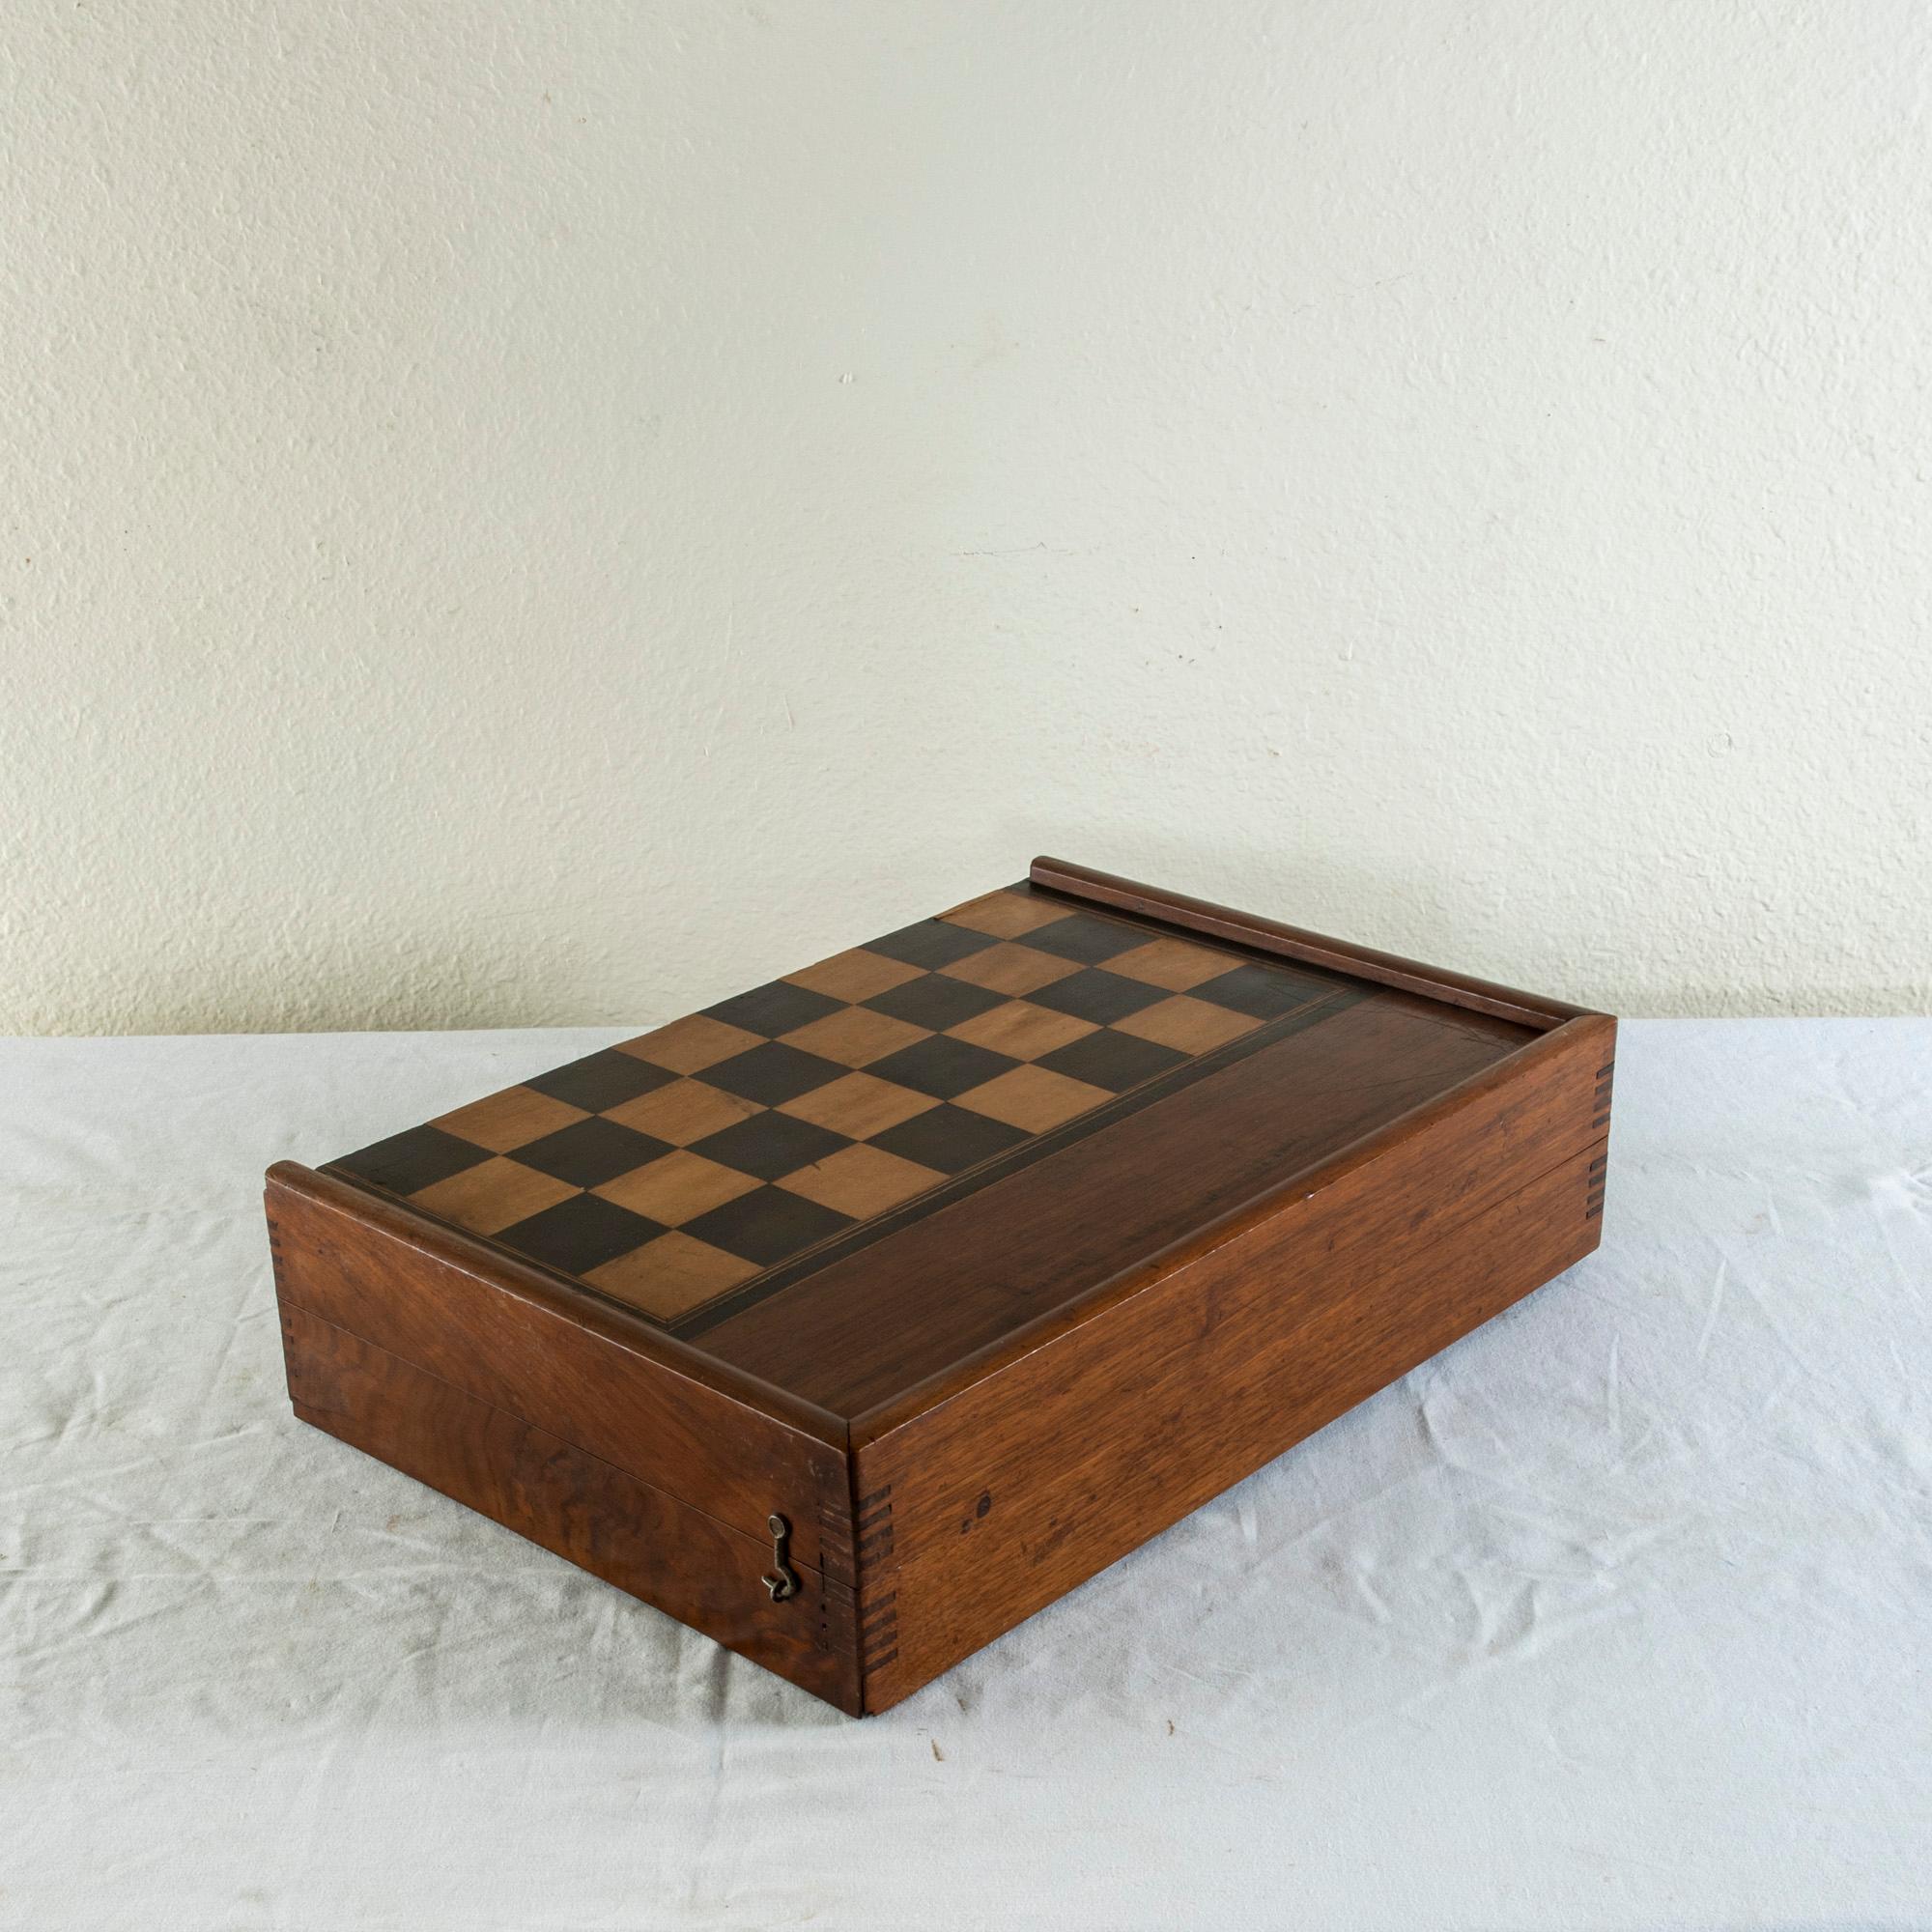 This French walnut marquetry folding game box from the mid-nineteenth century is for checkers, chess, and backgammon. It is finely constructed with dovetailed corners, inset hinges, and a locking brass hook on each side. The checker board side of